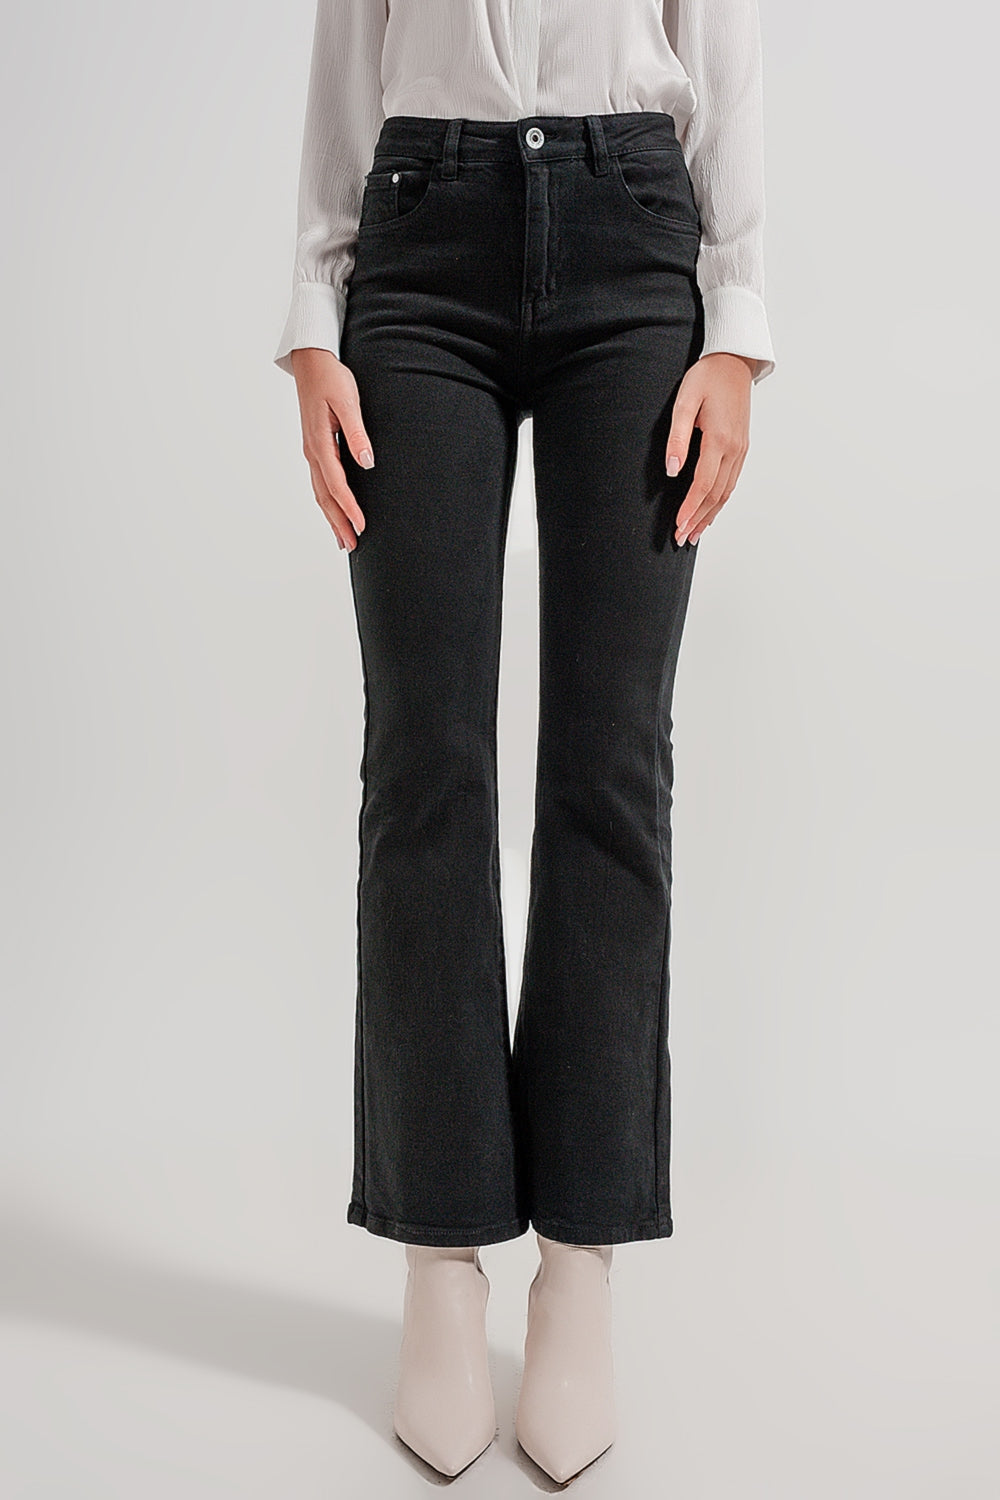 Q2 Flared jeans in black